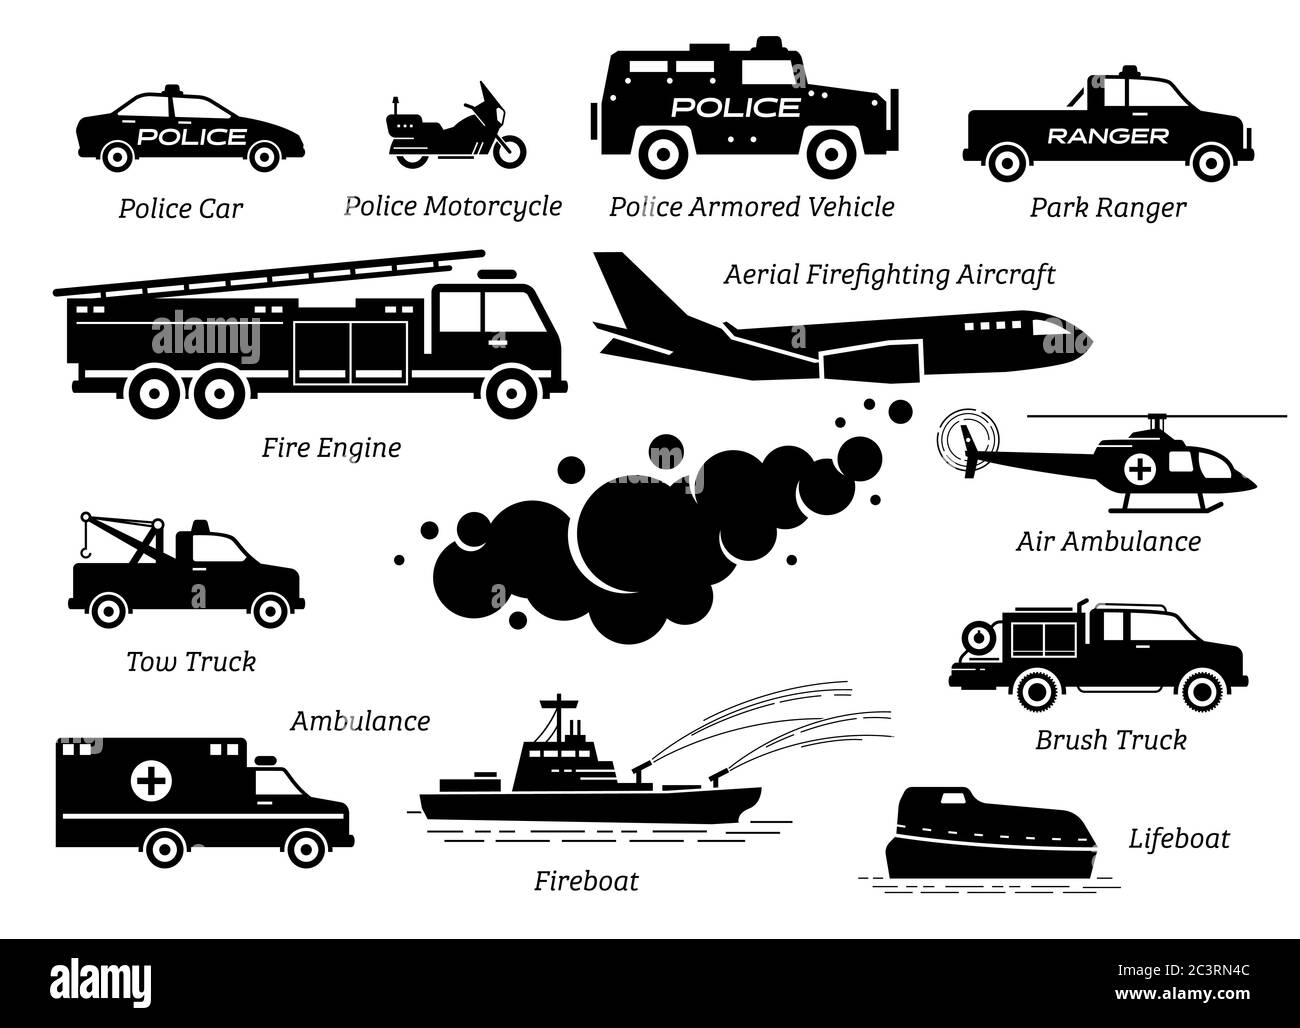 List of emergency response vehicles icon set. Artwork depicts police car, police motorcycle, armored vehicle,  fire engine, ambulance, lifeboat, helic Stock Vector